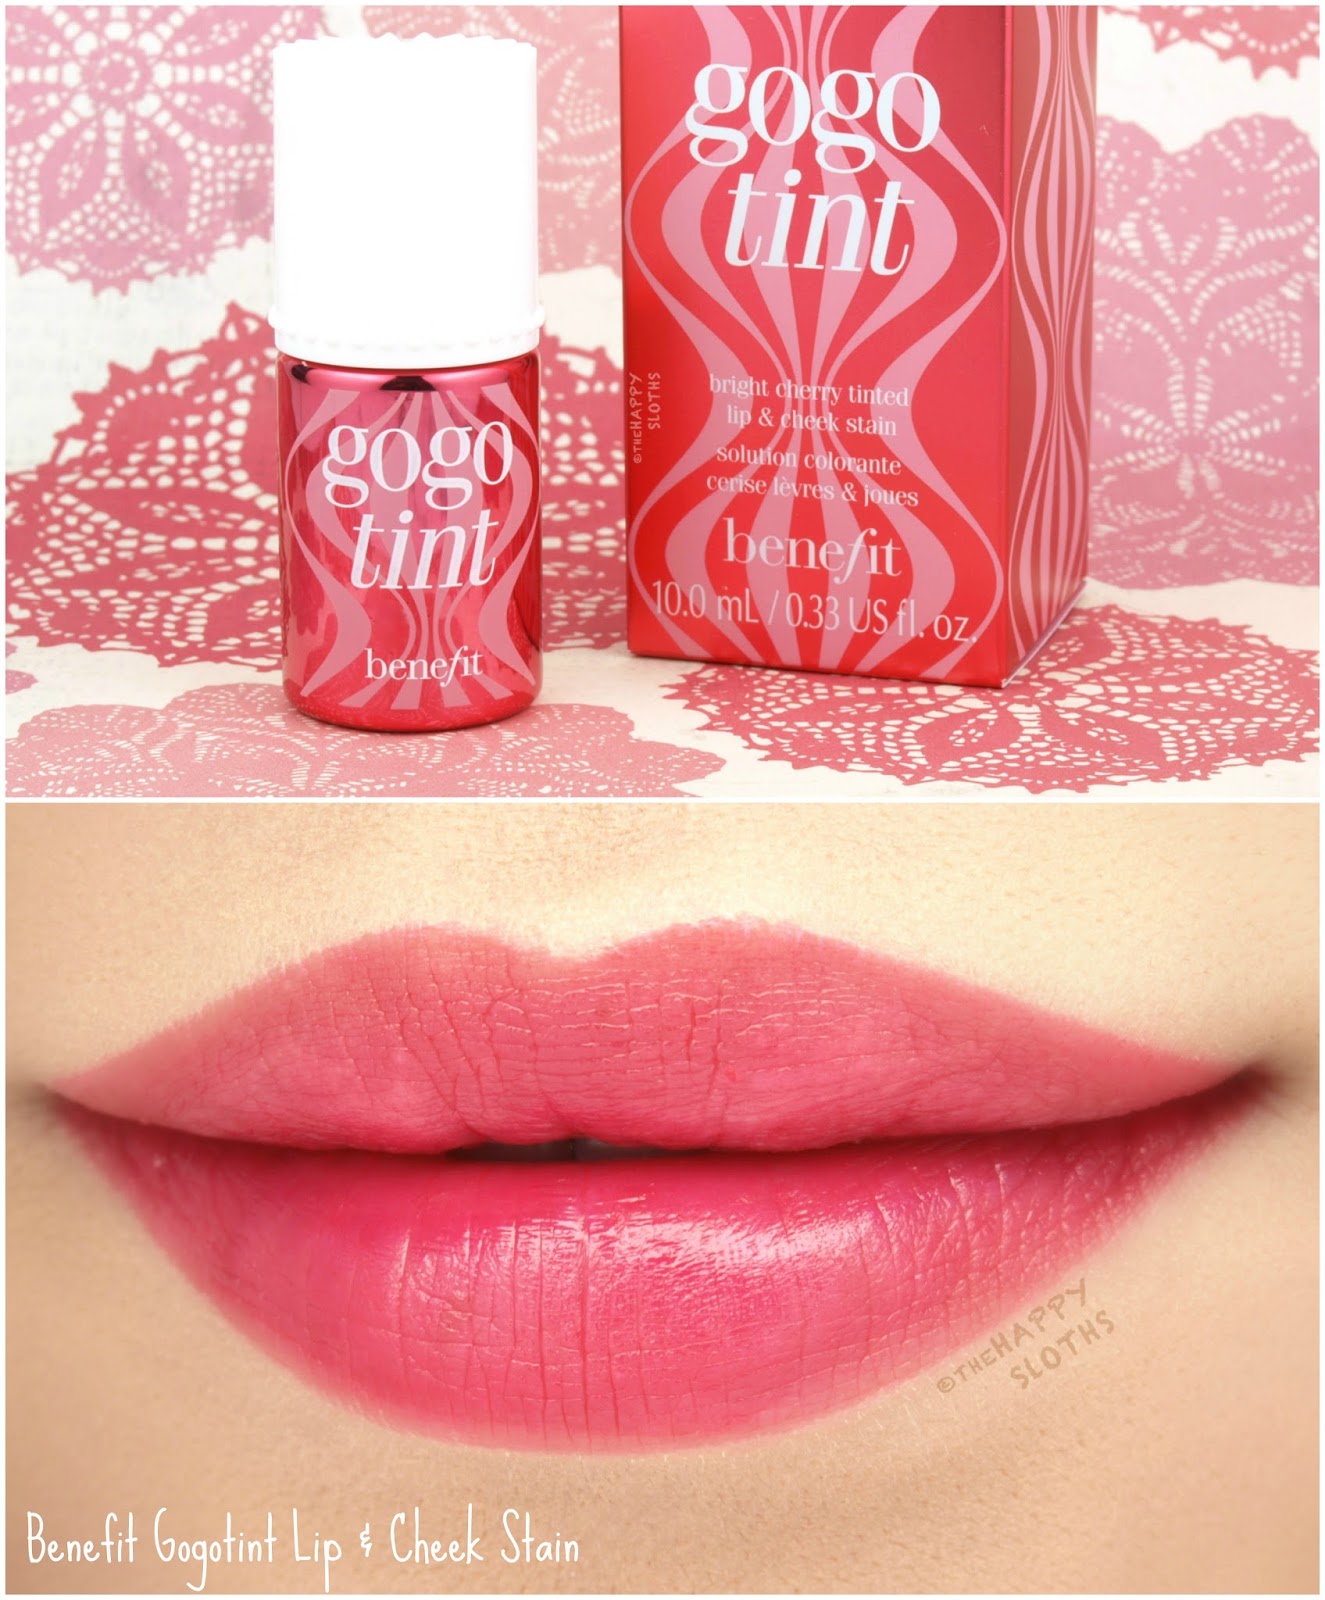 Benefit Gogotint Lip & Cheek Stain: Review and Swatches